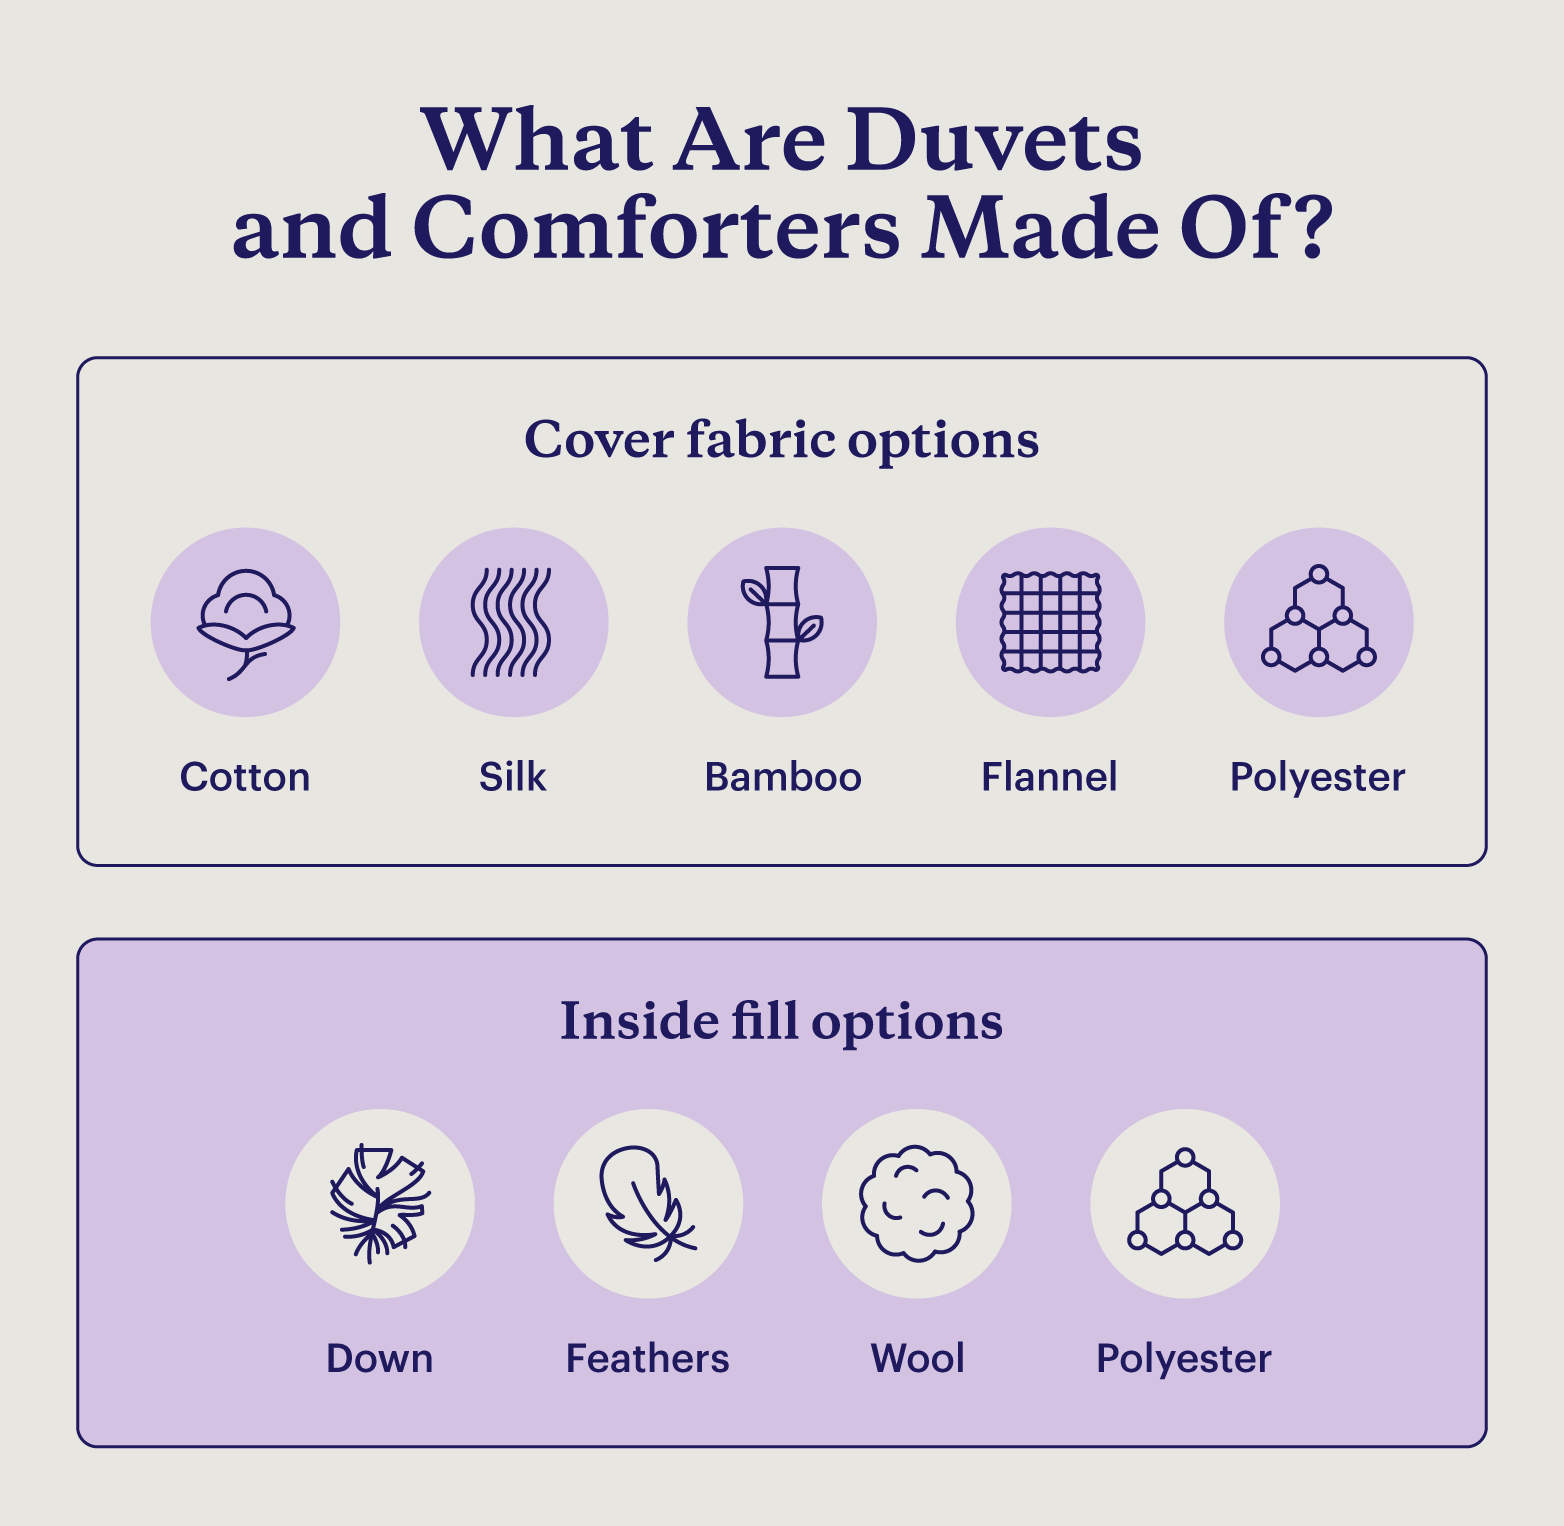 Graphic illustrating the cover fabric and fill options for duvets and comforters. 